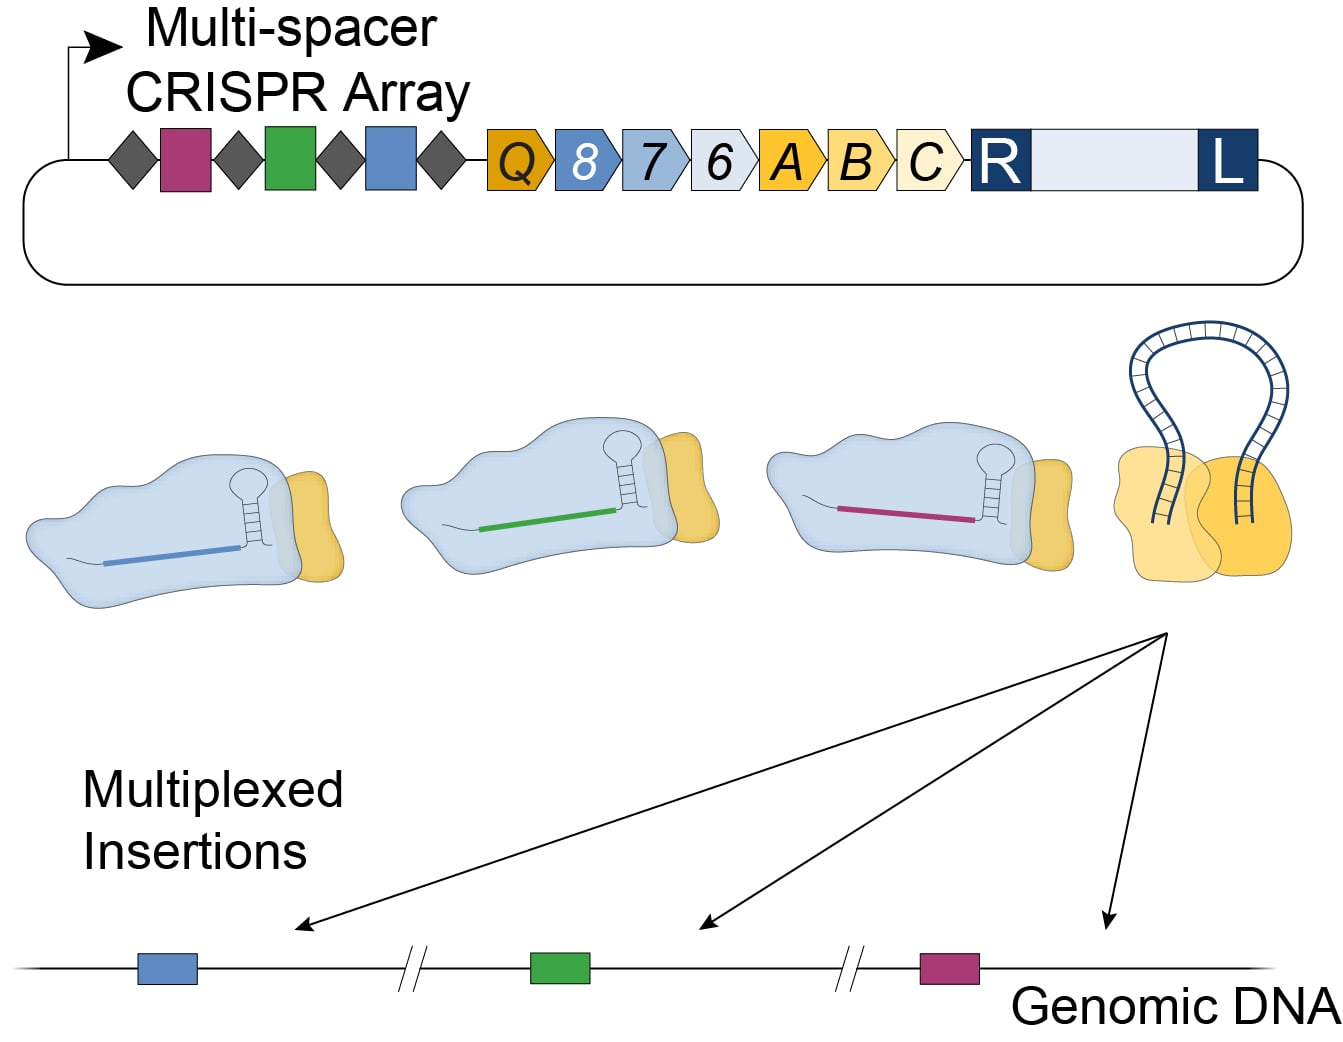 Multiplexed insertion is possible using a single plasmid that contains a multi-spacer CRISPR array. This encodes separate gRNAs that target different locations in the genome.